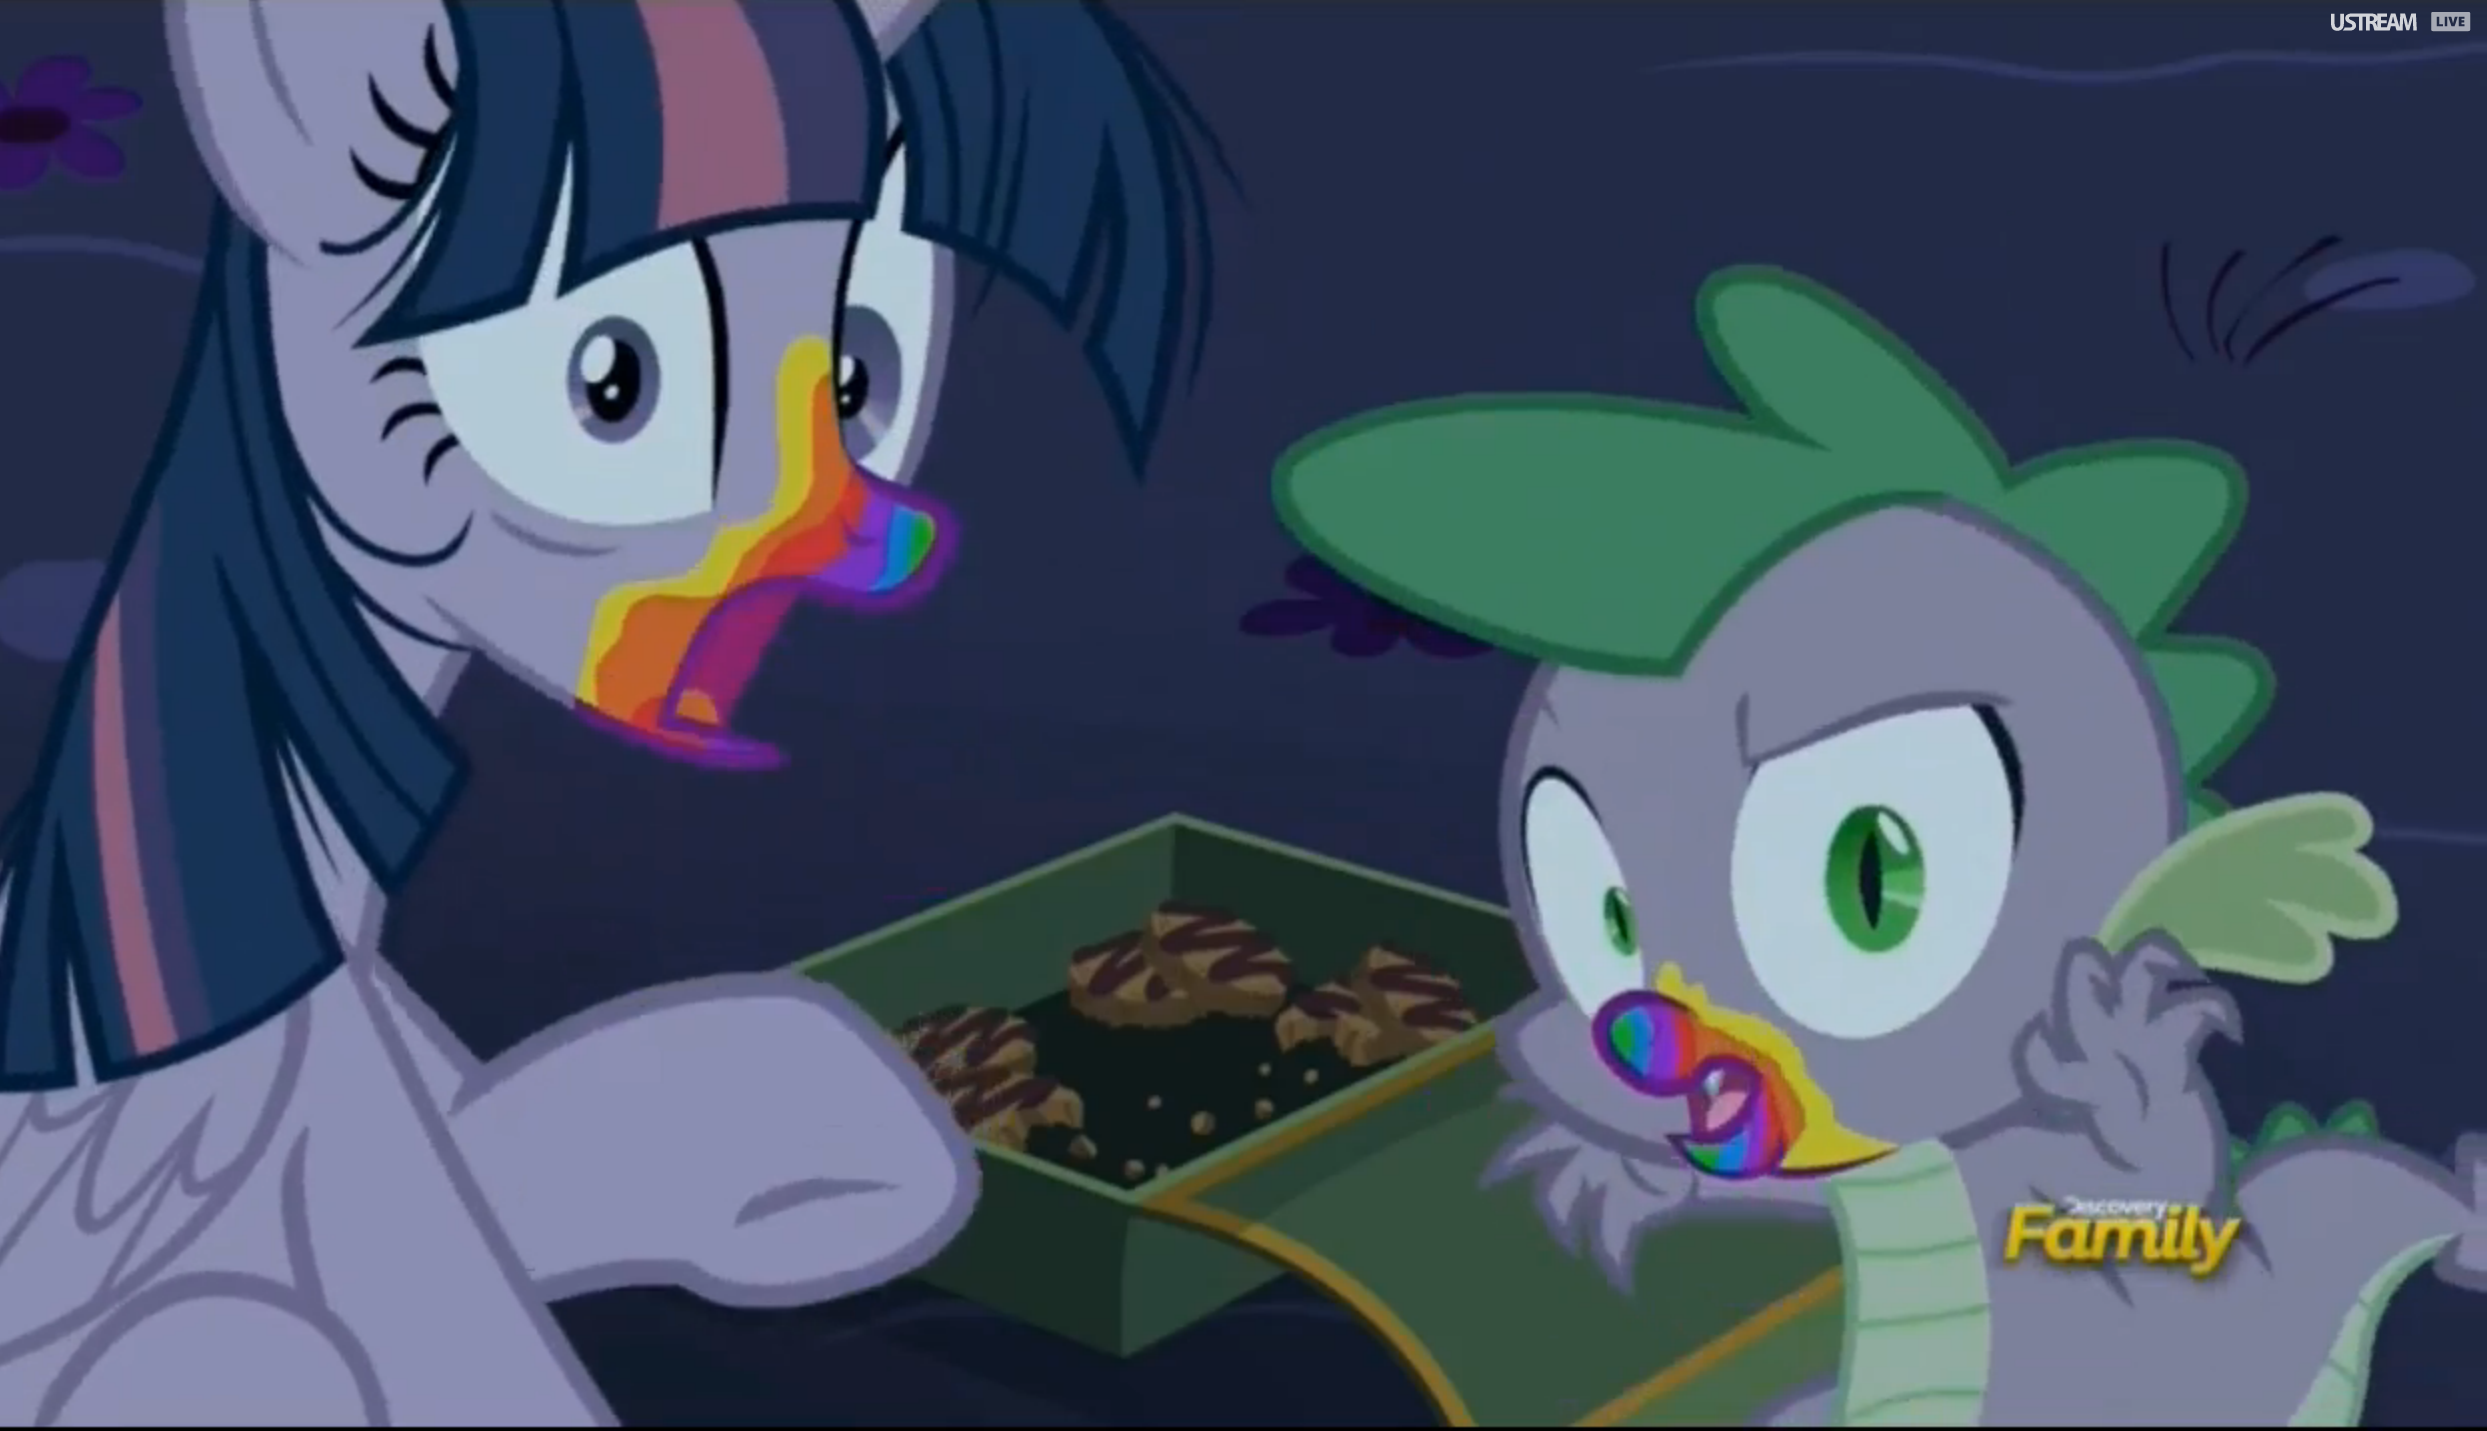 https://derpicdn.net/img/view/2016/8/13/1224151__safe_twilight+sparkle_screencap_princess+twilight_spike_food_discovery+family+logo_cookie_spoiler-colon-s06e15_28+pranks+later.png